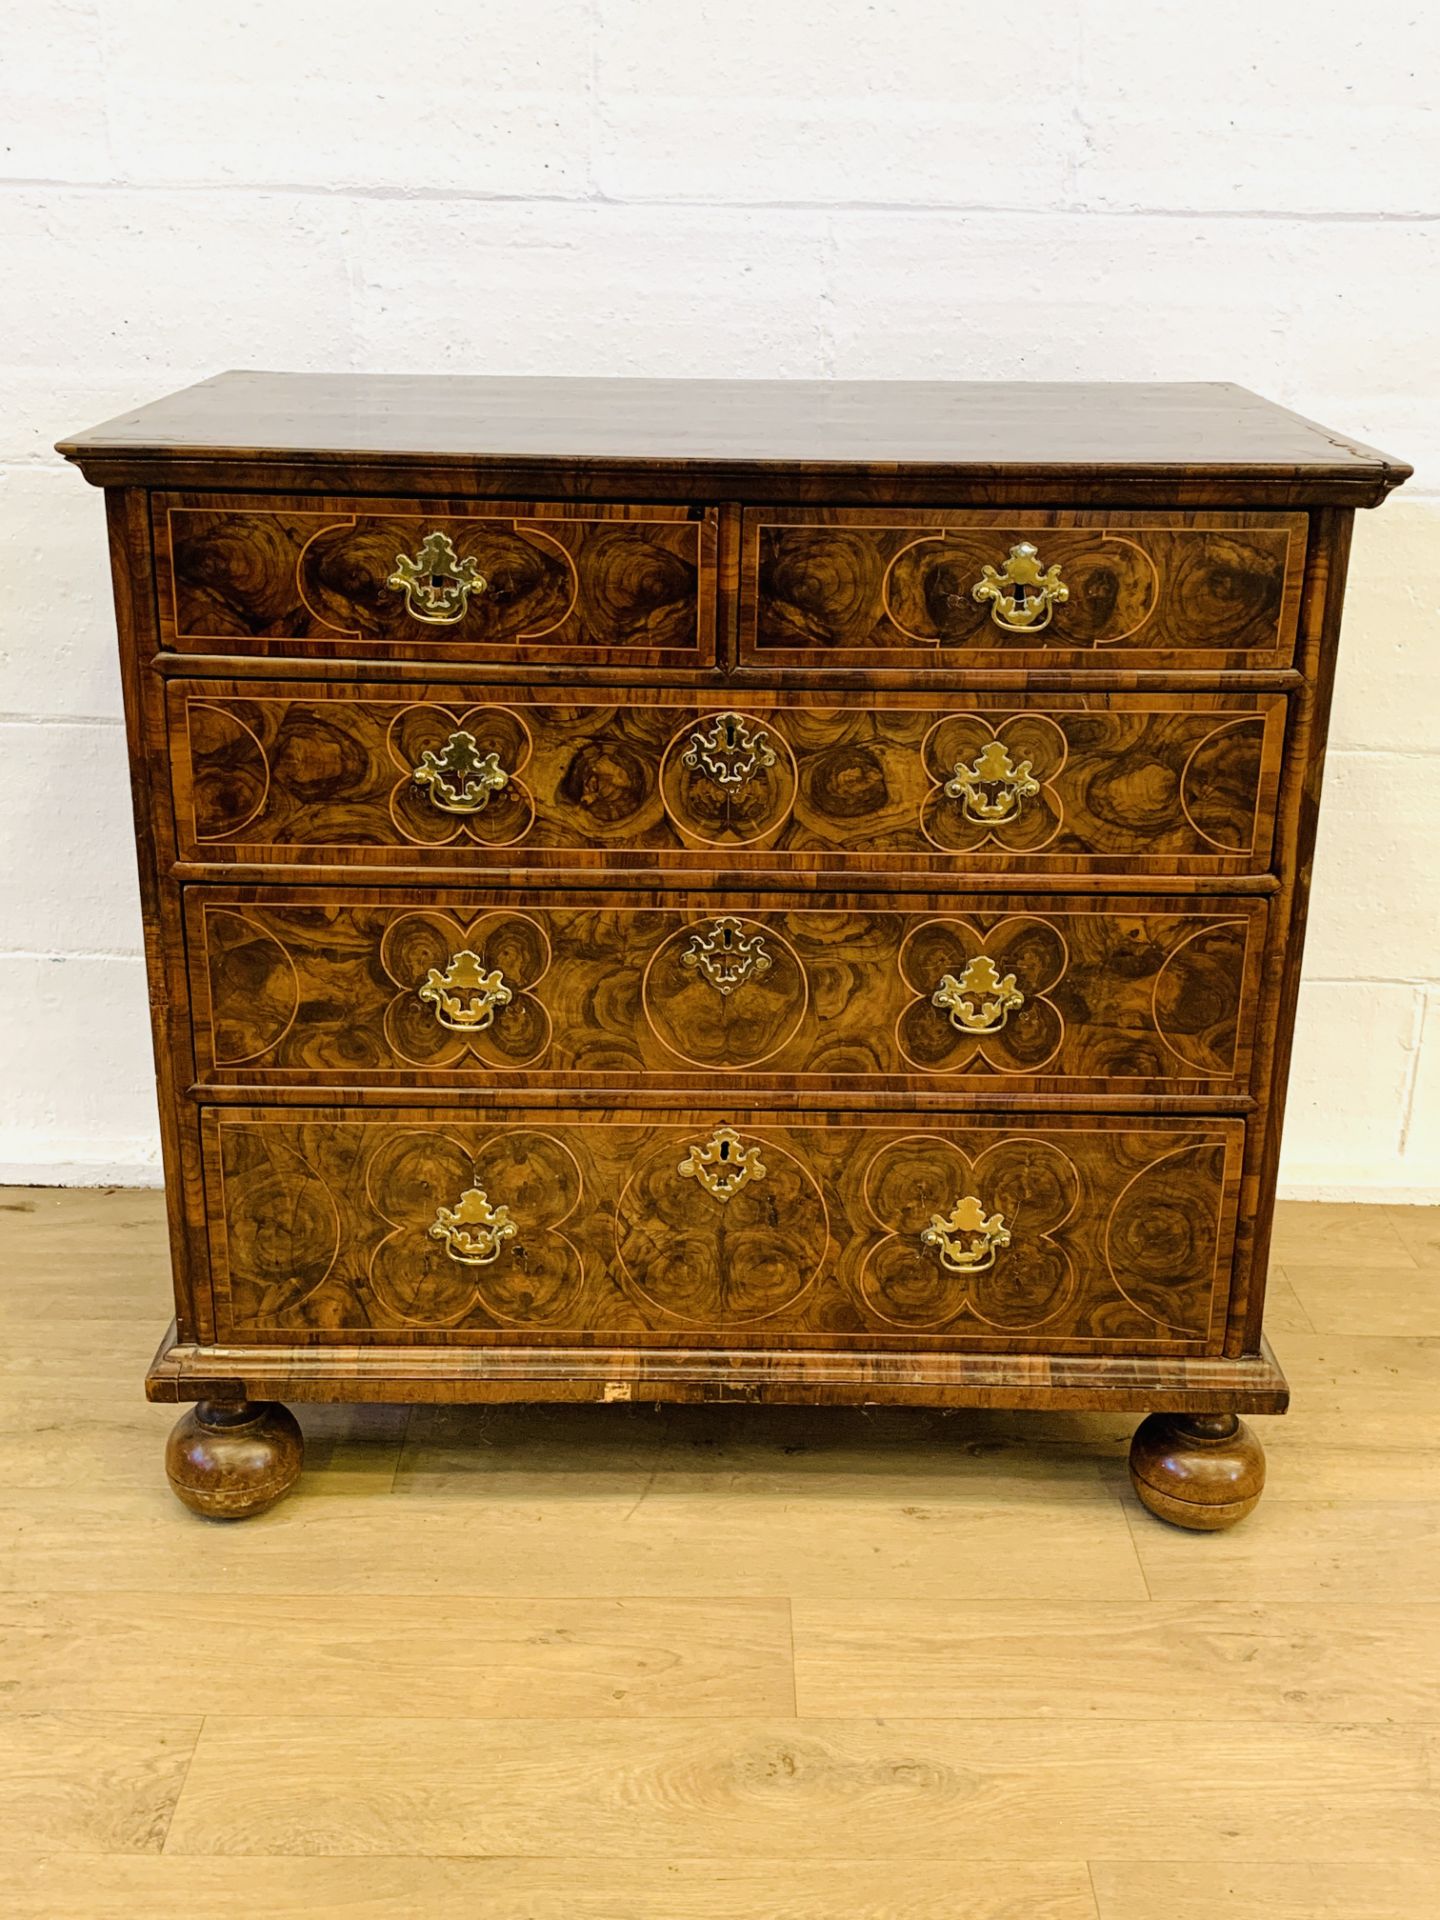 William and Mary period chest of drawers